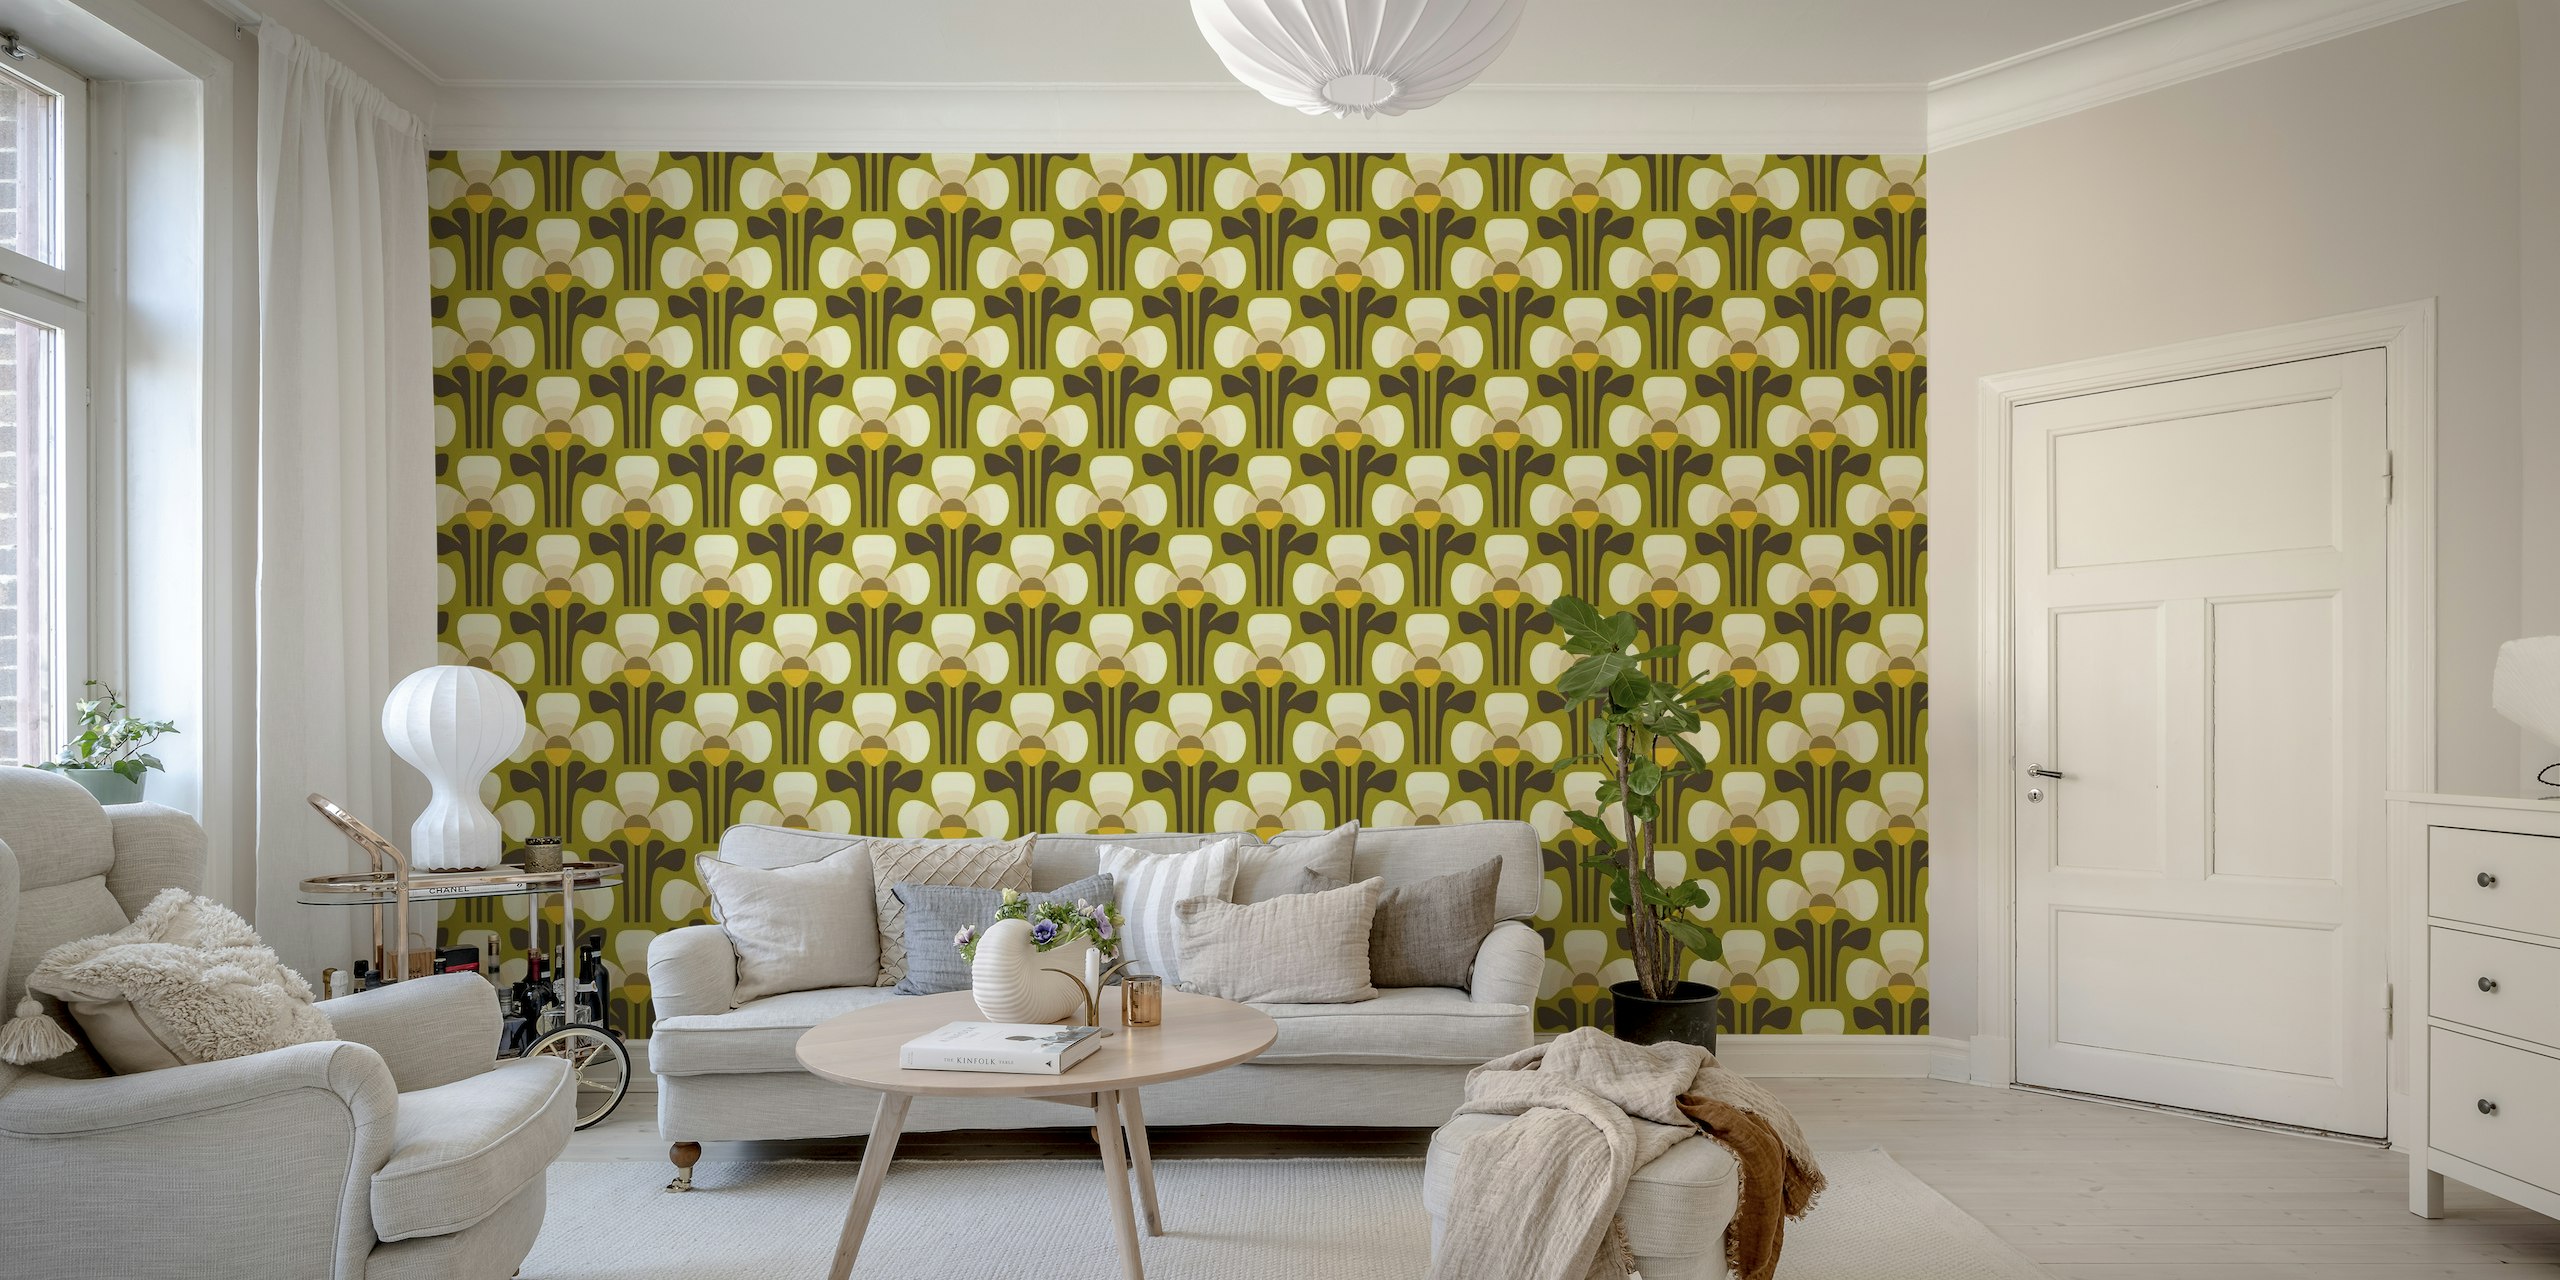 Retro Clovers, Sage wall mural with abstract clover patterns in green, cream, and yellow hues